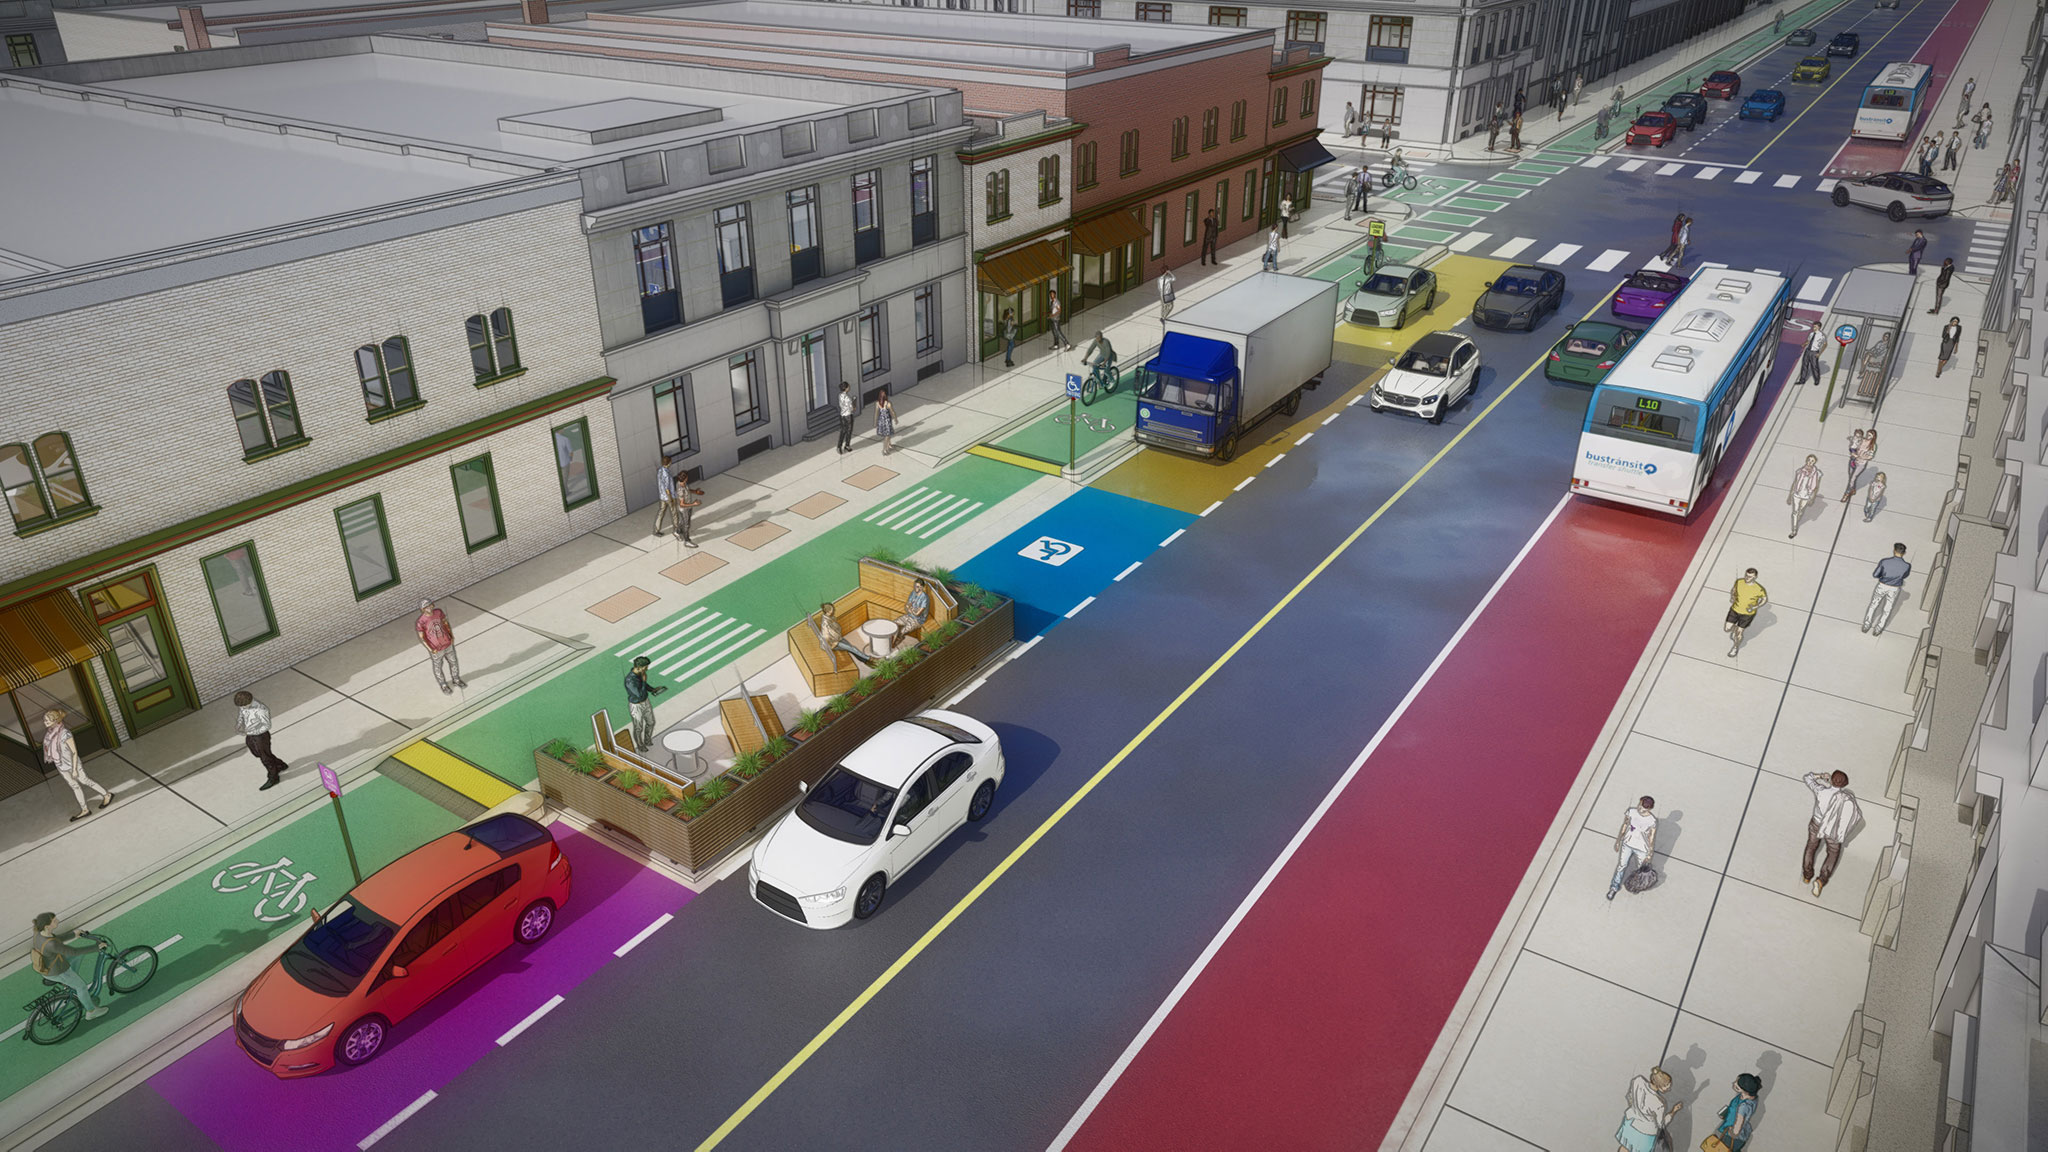 Rendering of a city block with a managed curb, bus lane, and bike lane